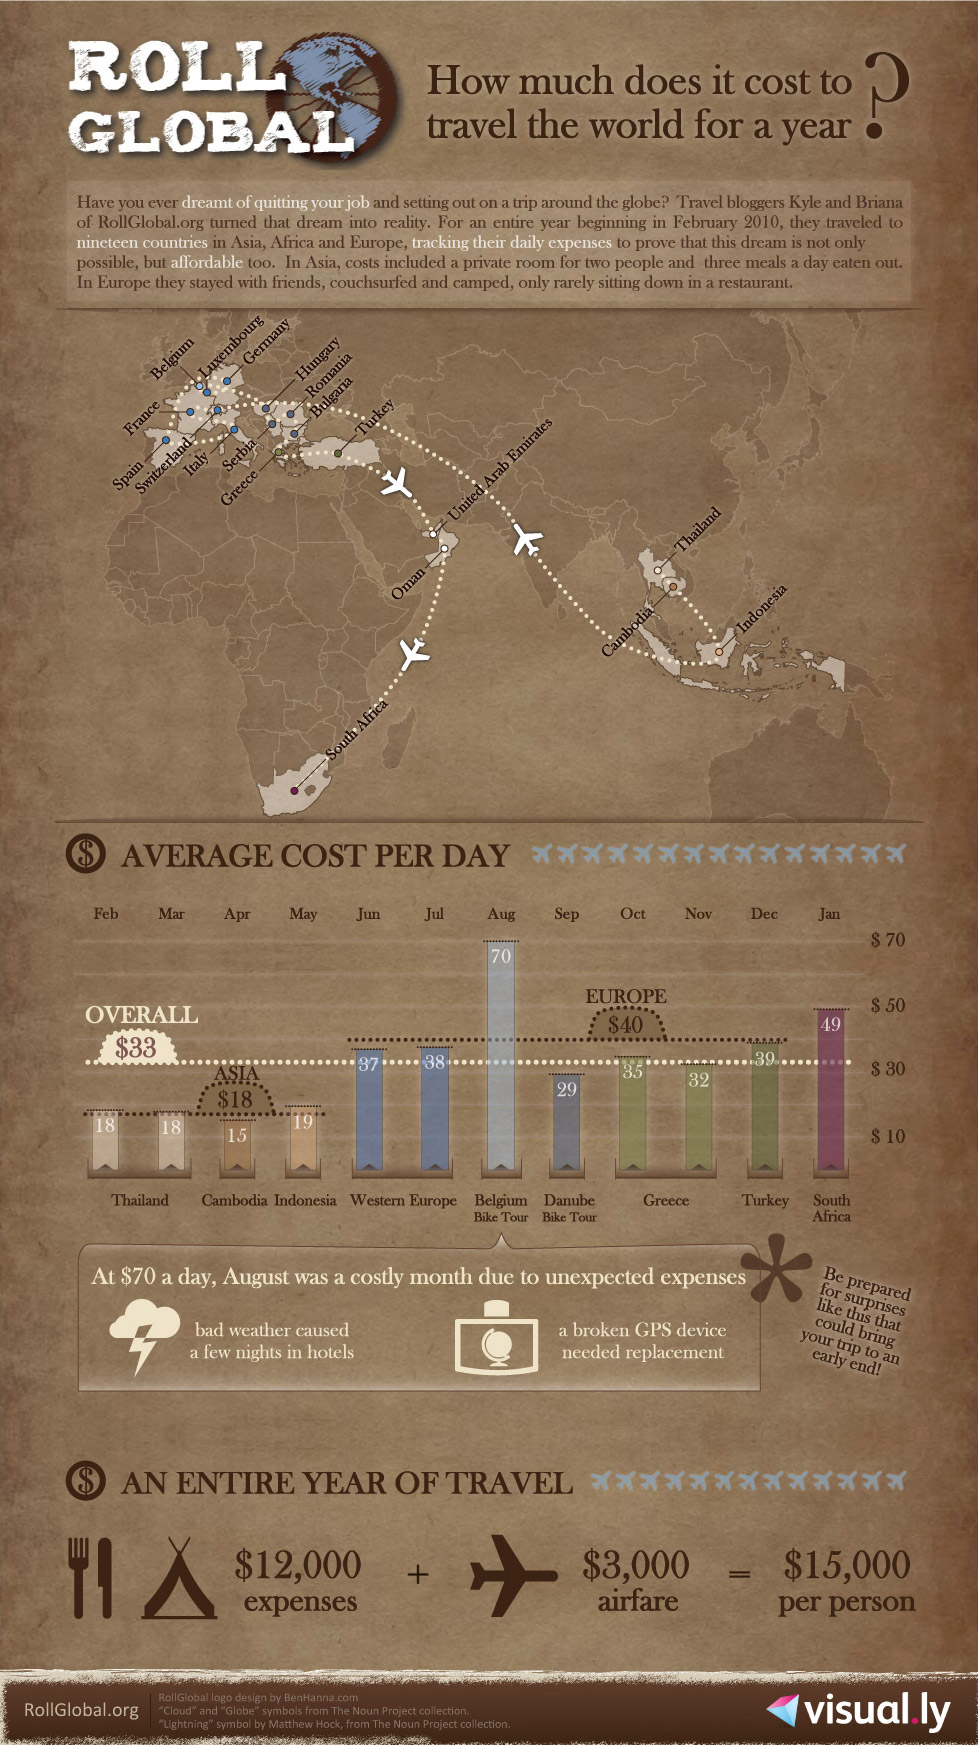 How much does it cost to travel around the world?